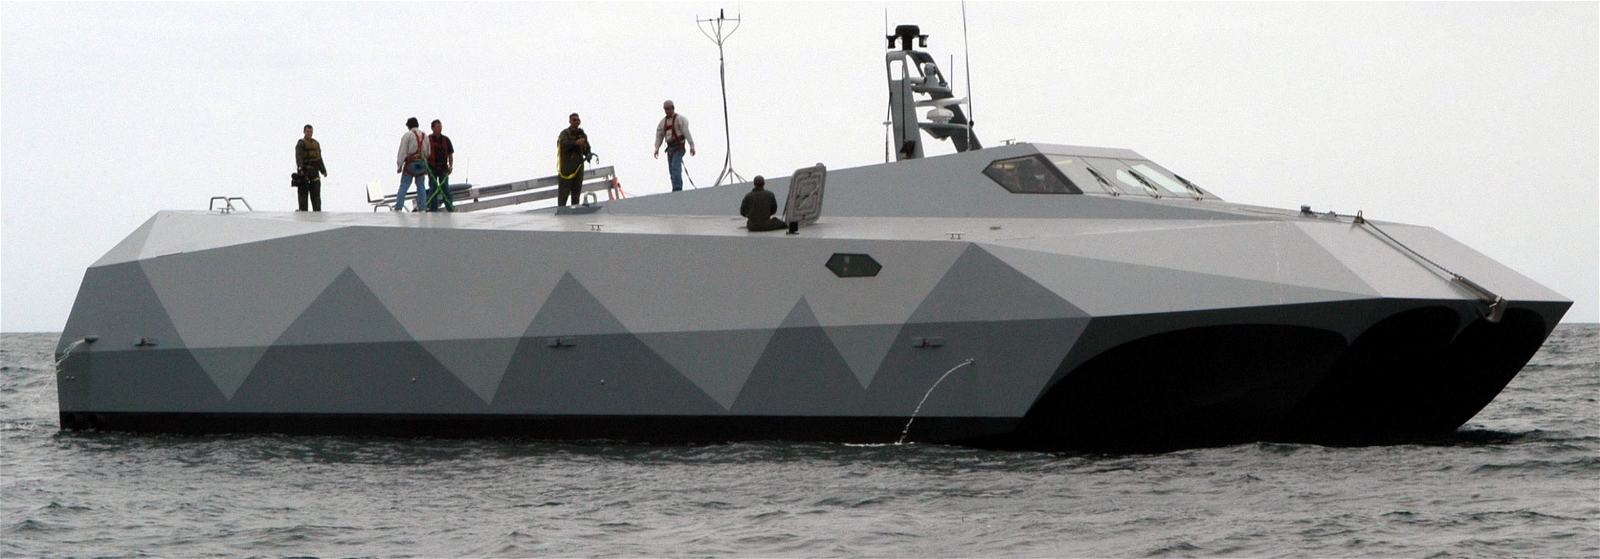 Side view of Stiletto ship with several people on board